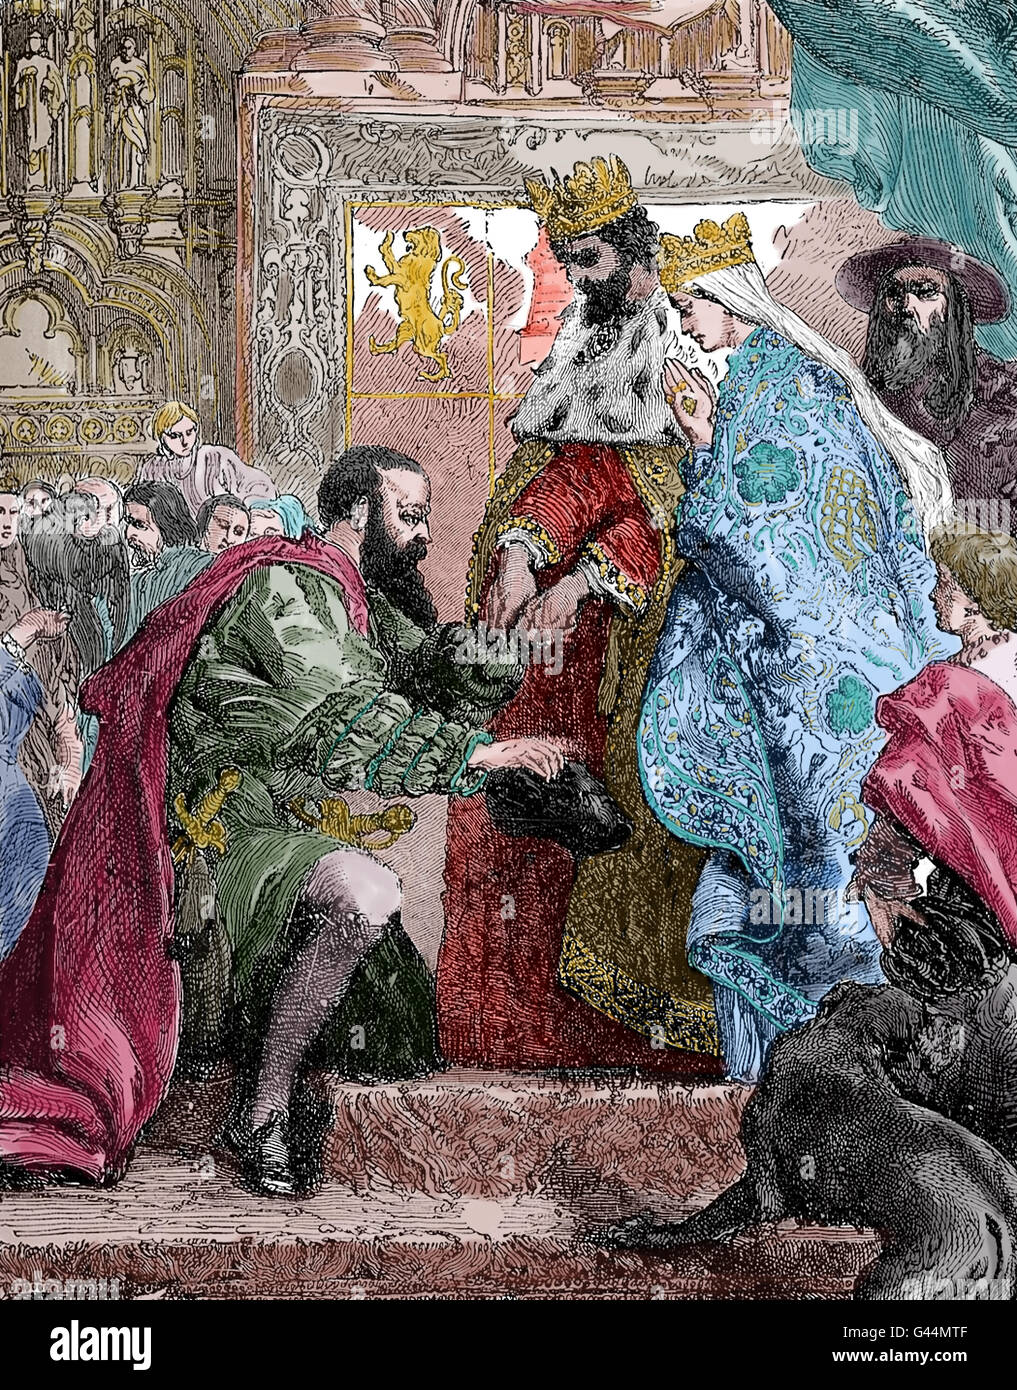 Reception of Columbus by King Ferdinand I and Queen Isabella in Barcelona, 1493. Engraving, 19th century. Color. Stock Photo